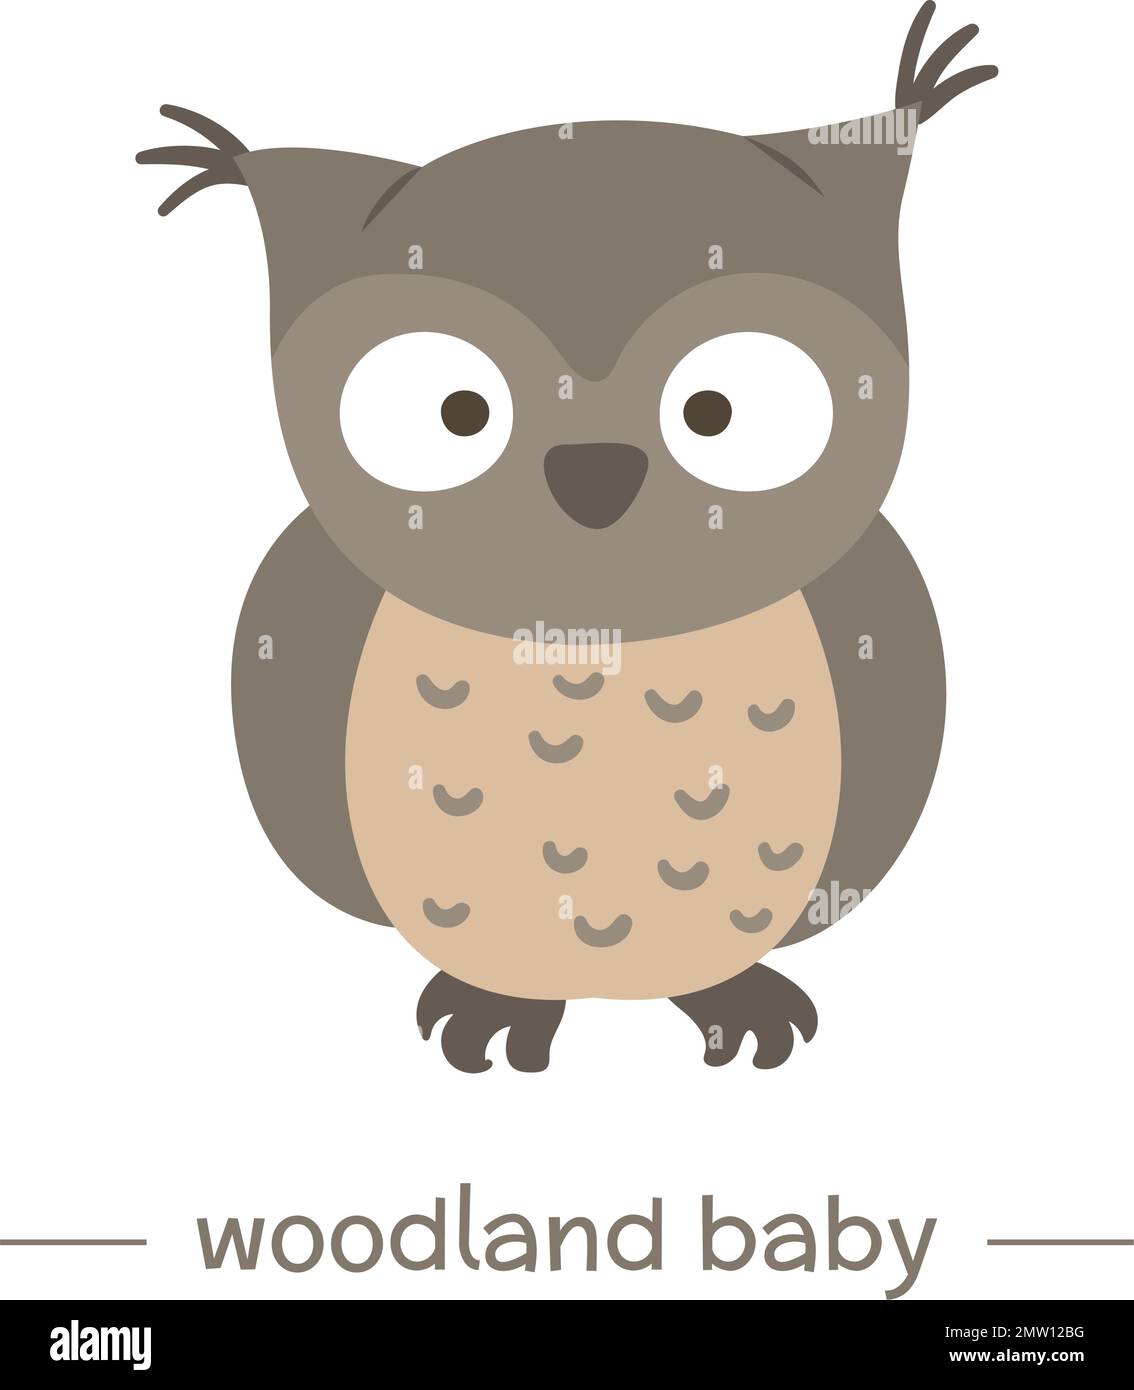 Vector hand drawn flat baby owl. Funny woodland animal icon. Cute forest animalistic illustration for children’s design, print, stationery Stock Vector